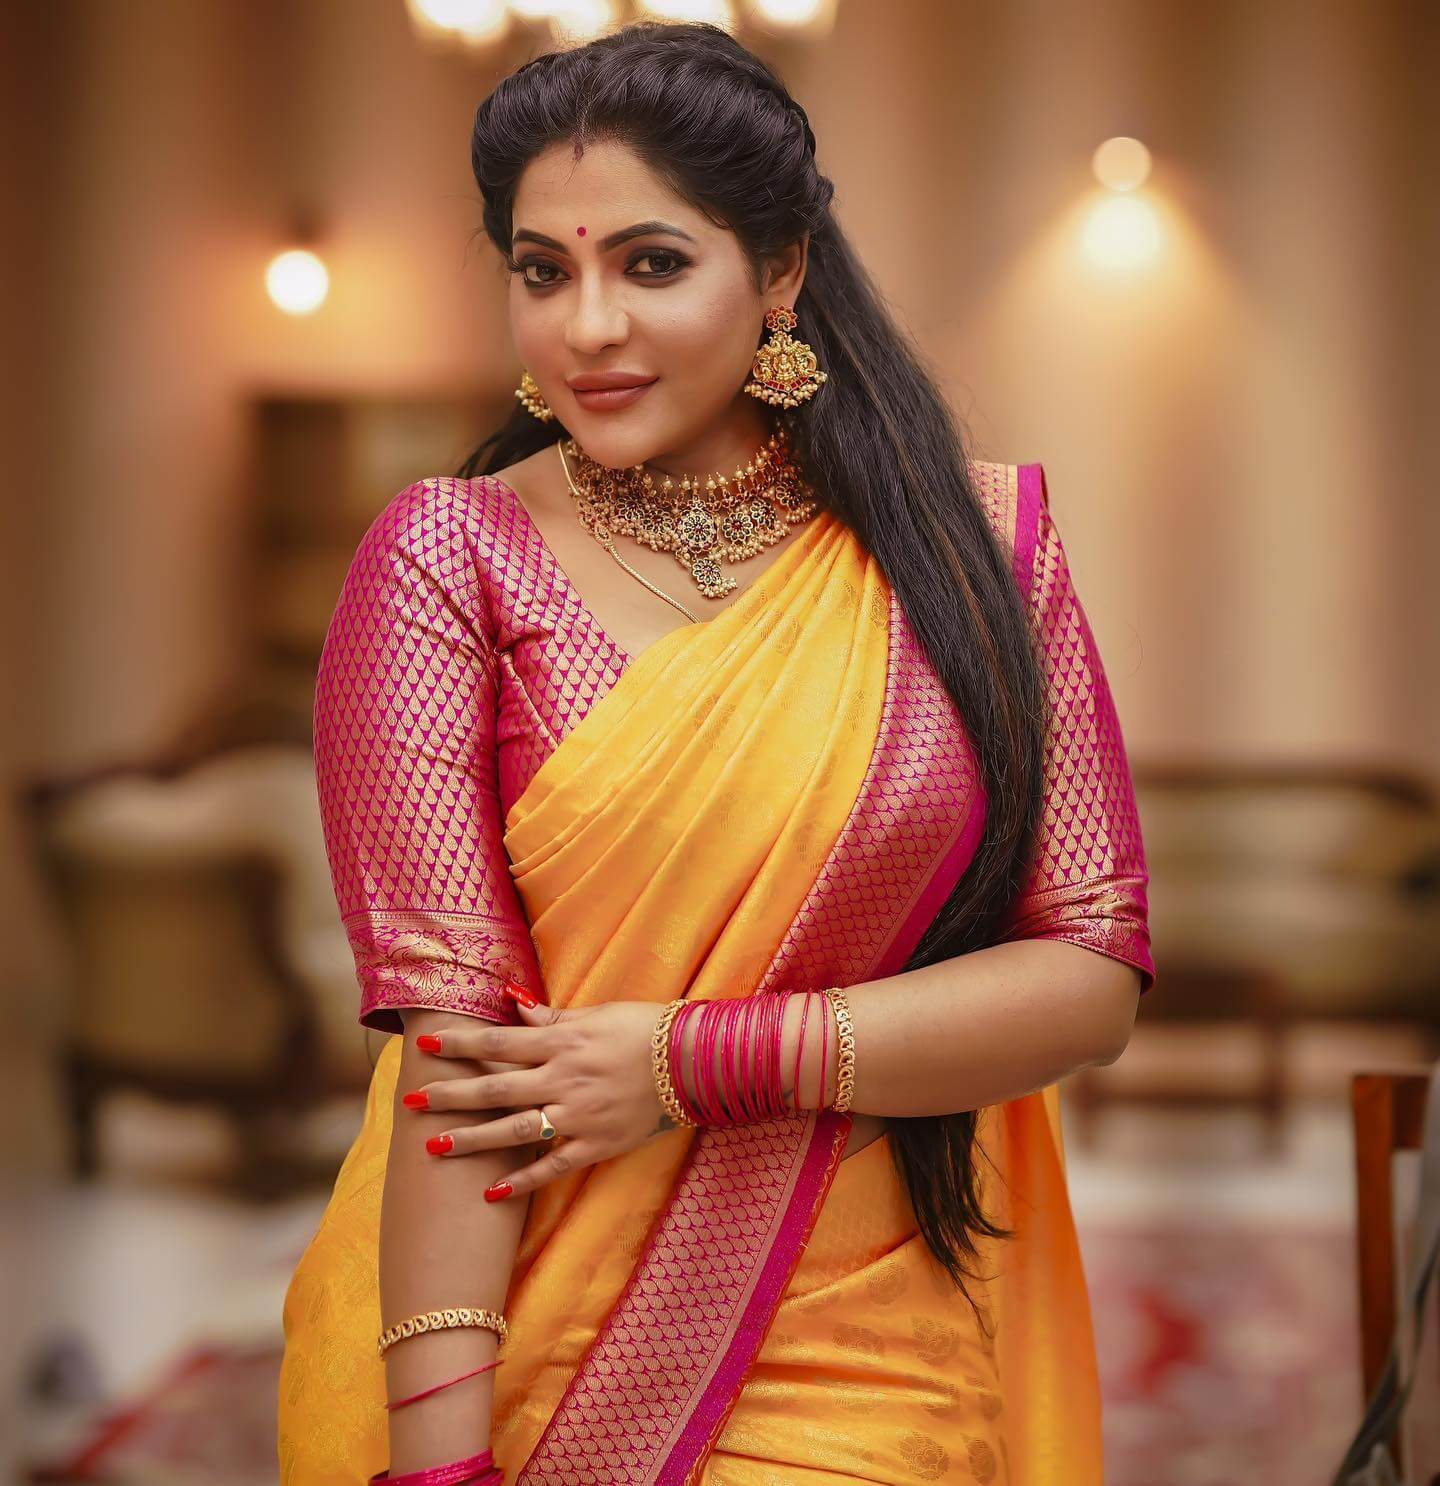 Gorgeous Reshma Pasupuleti In Yellow Silk Saree With Contrasting Pink Blouse - Ethnical Saree Outfits & Looks